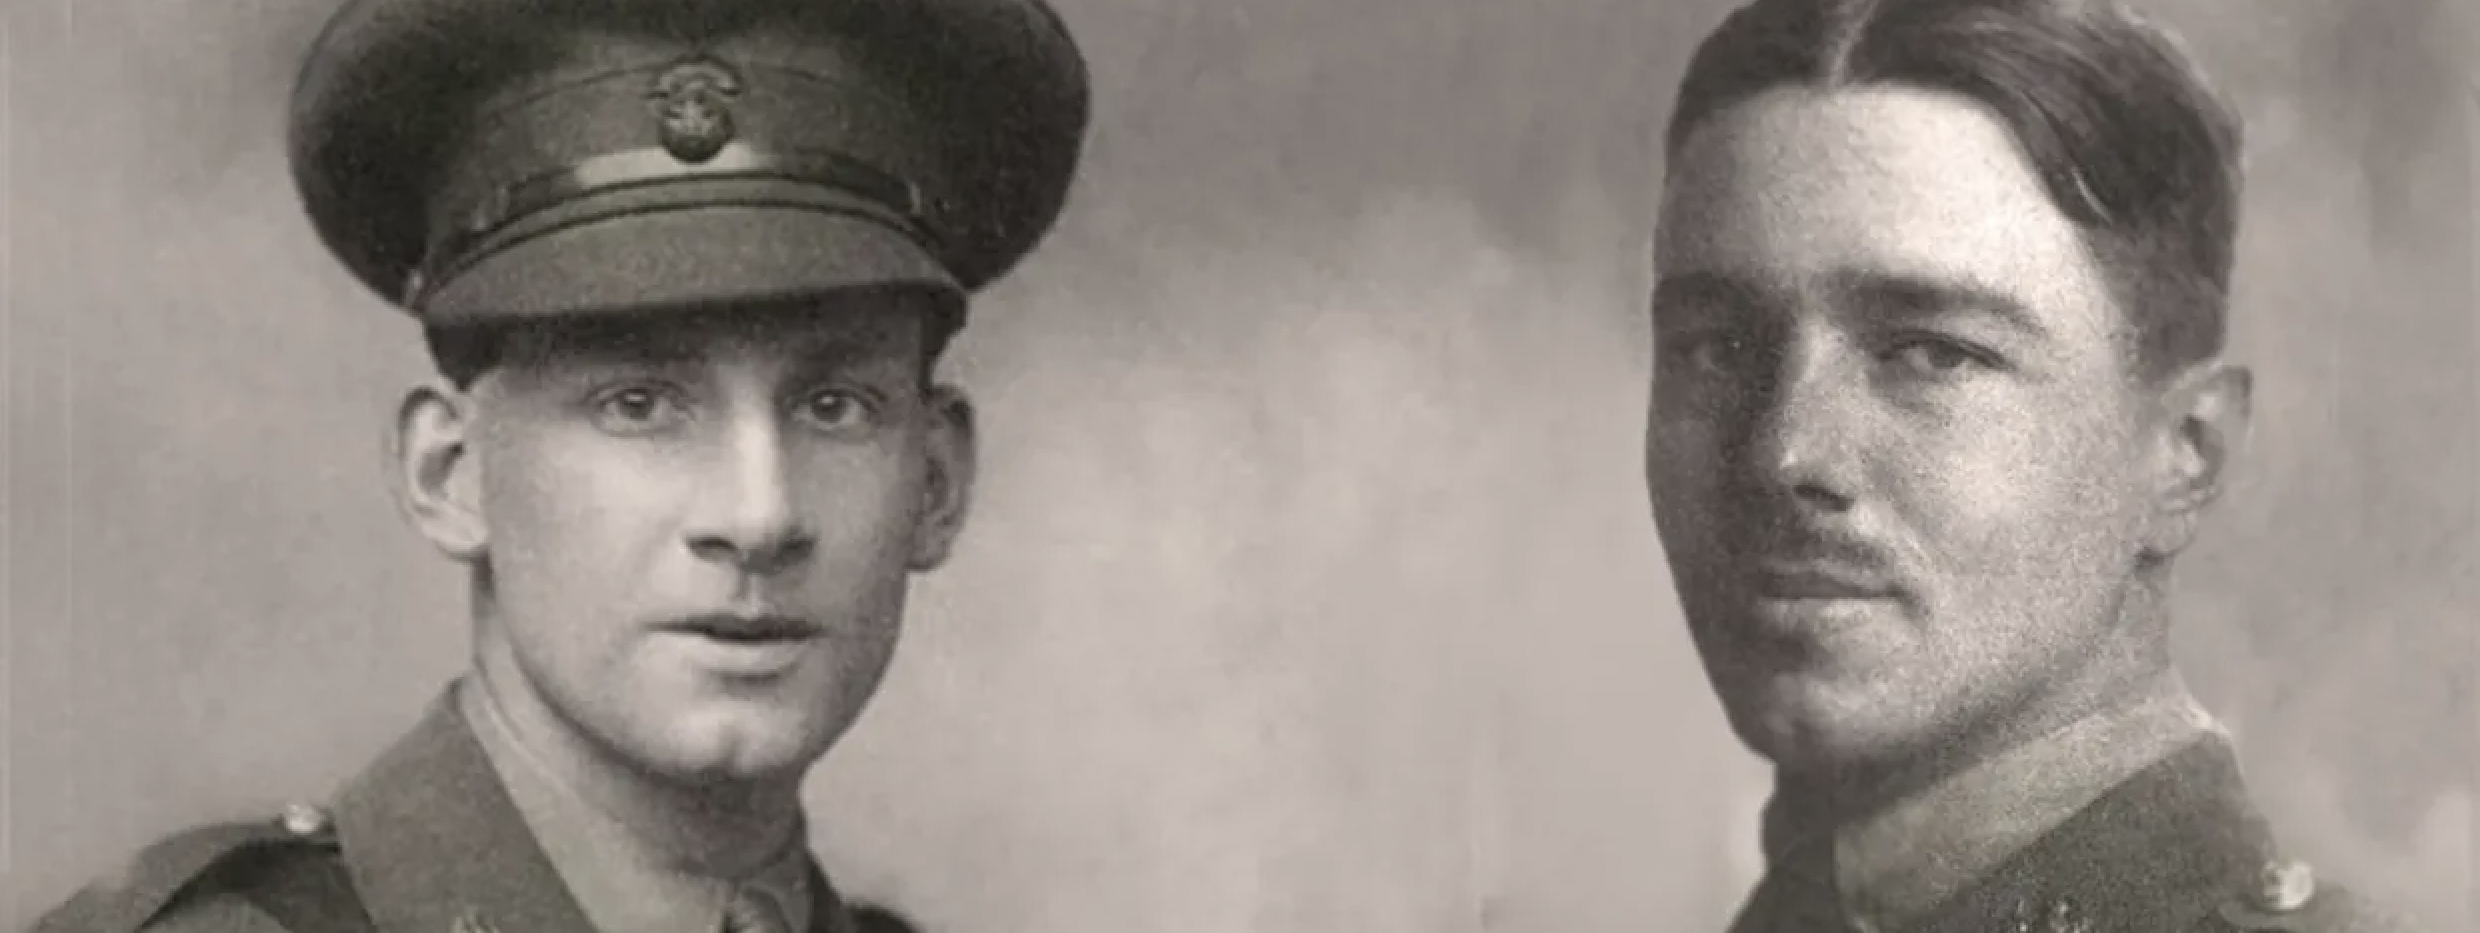 How Wilfred Owen and Siegfried Sassoon Forged a Literary and Romantic Bond